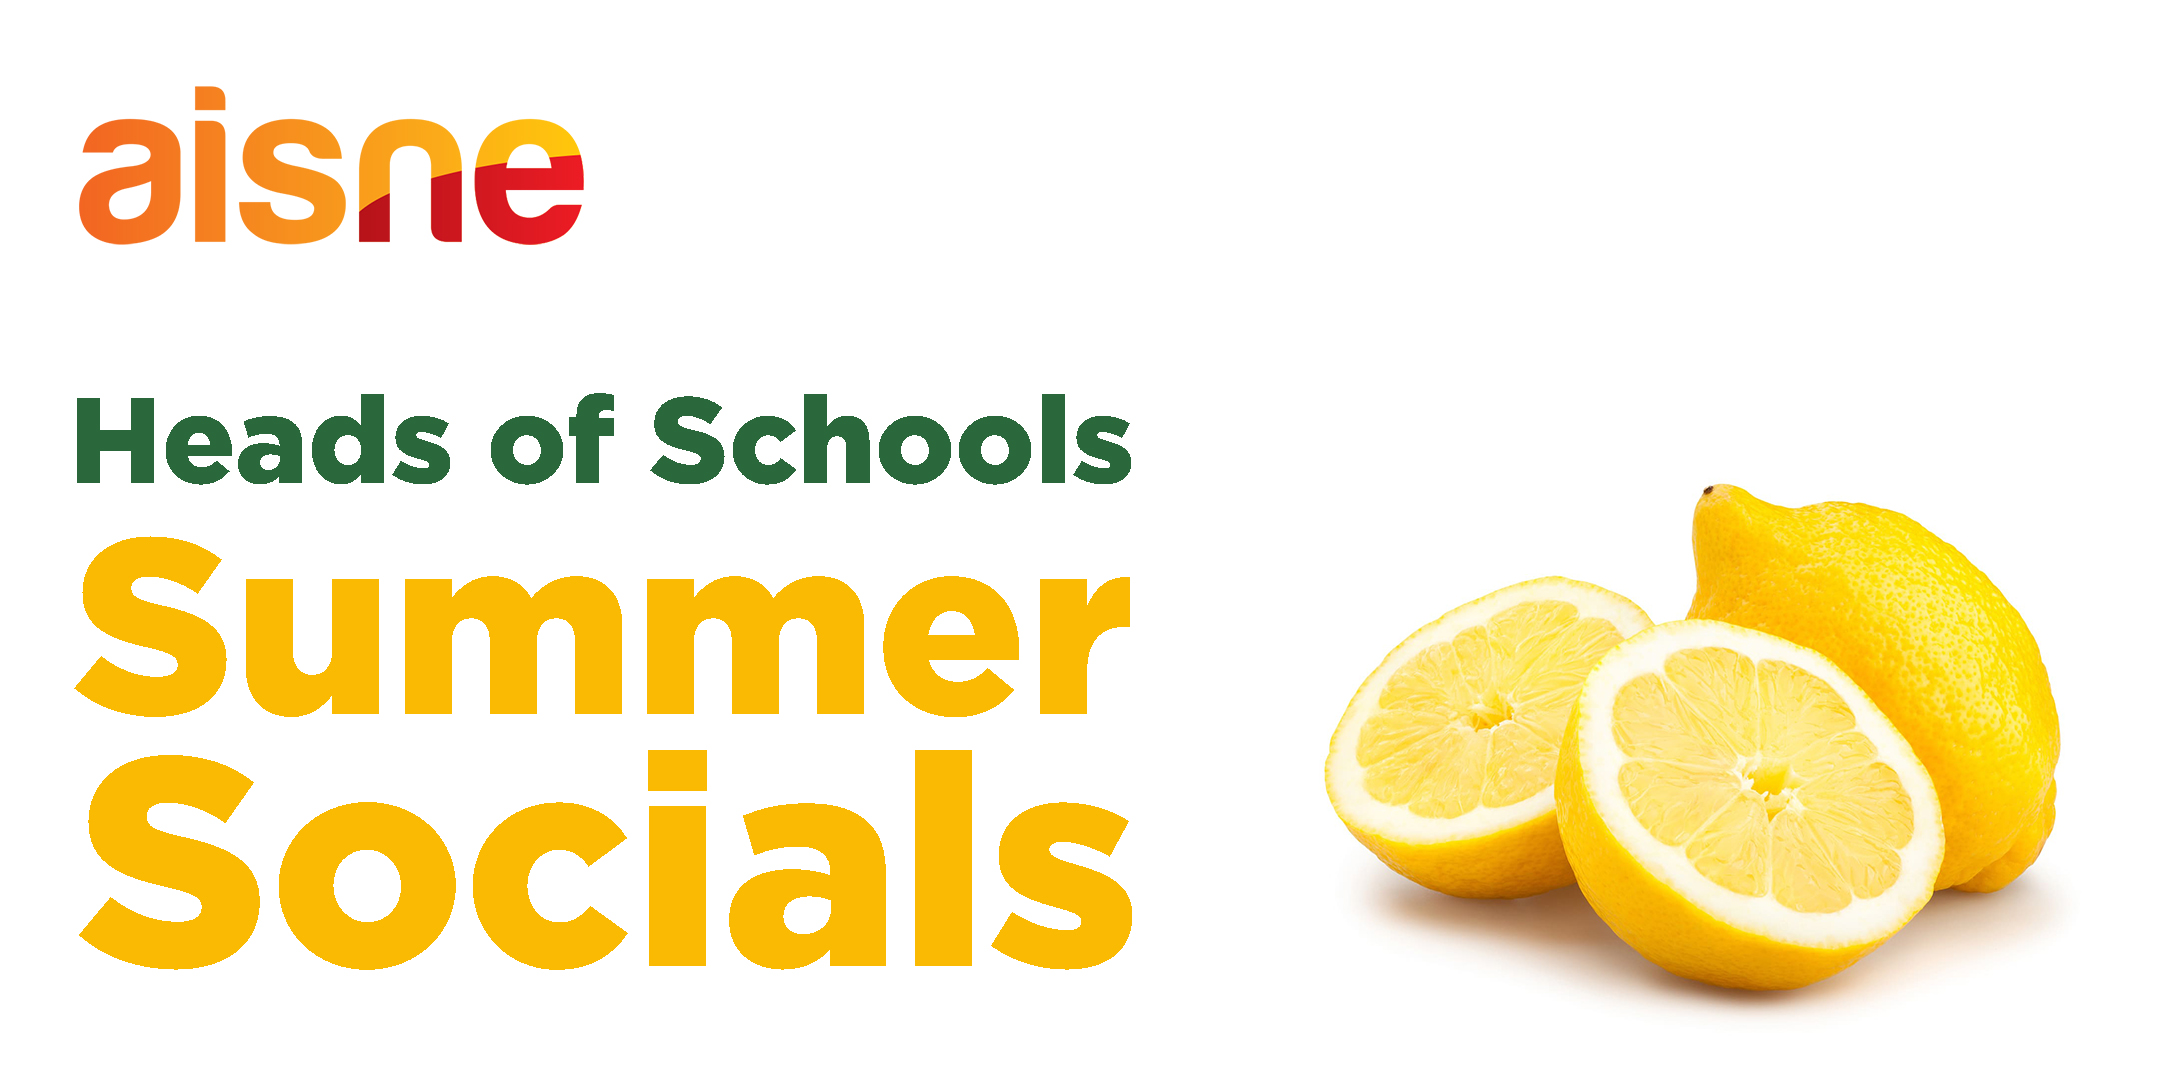 The AISNE logo with the text Heads of Schools Summer Socials underneath and a trio of bright yellow lemons to the right of the text.